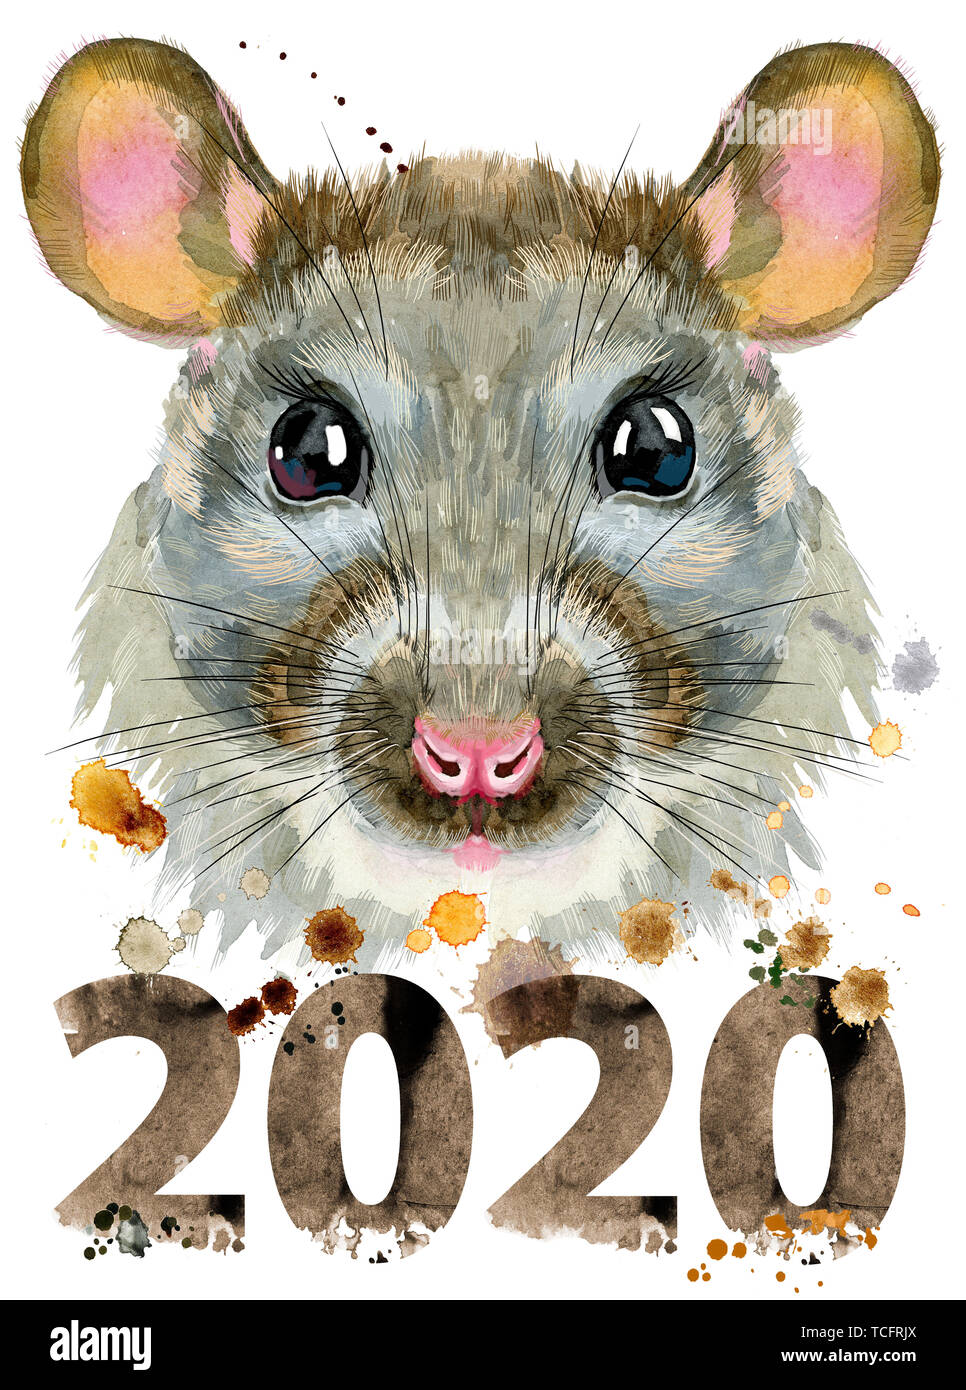 Cute rat for t-shirt graphics. Watercolor rat illustration with year 2020 Stock Photo